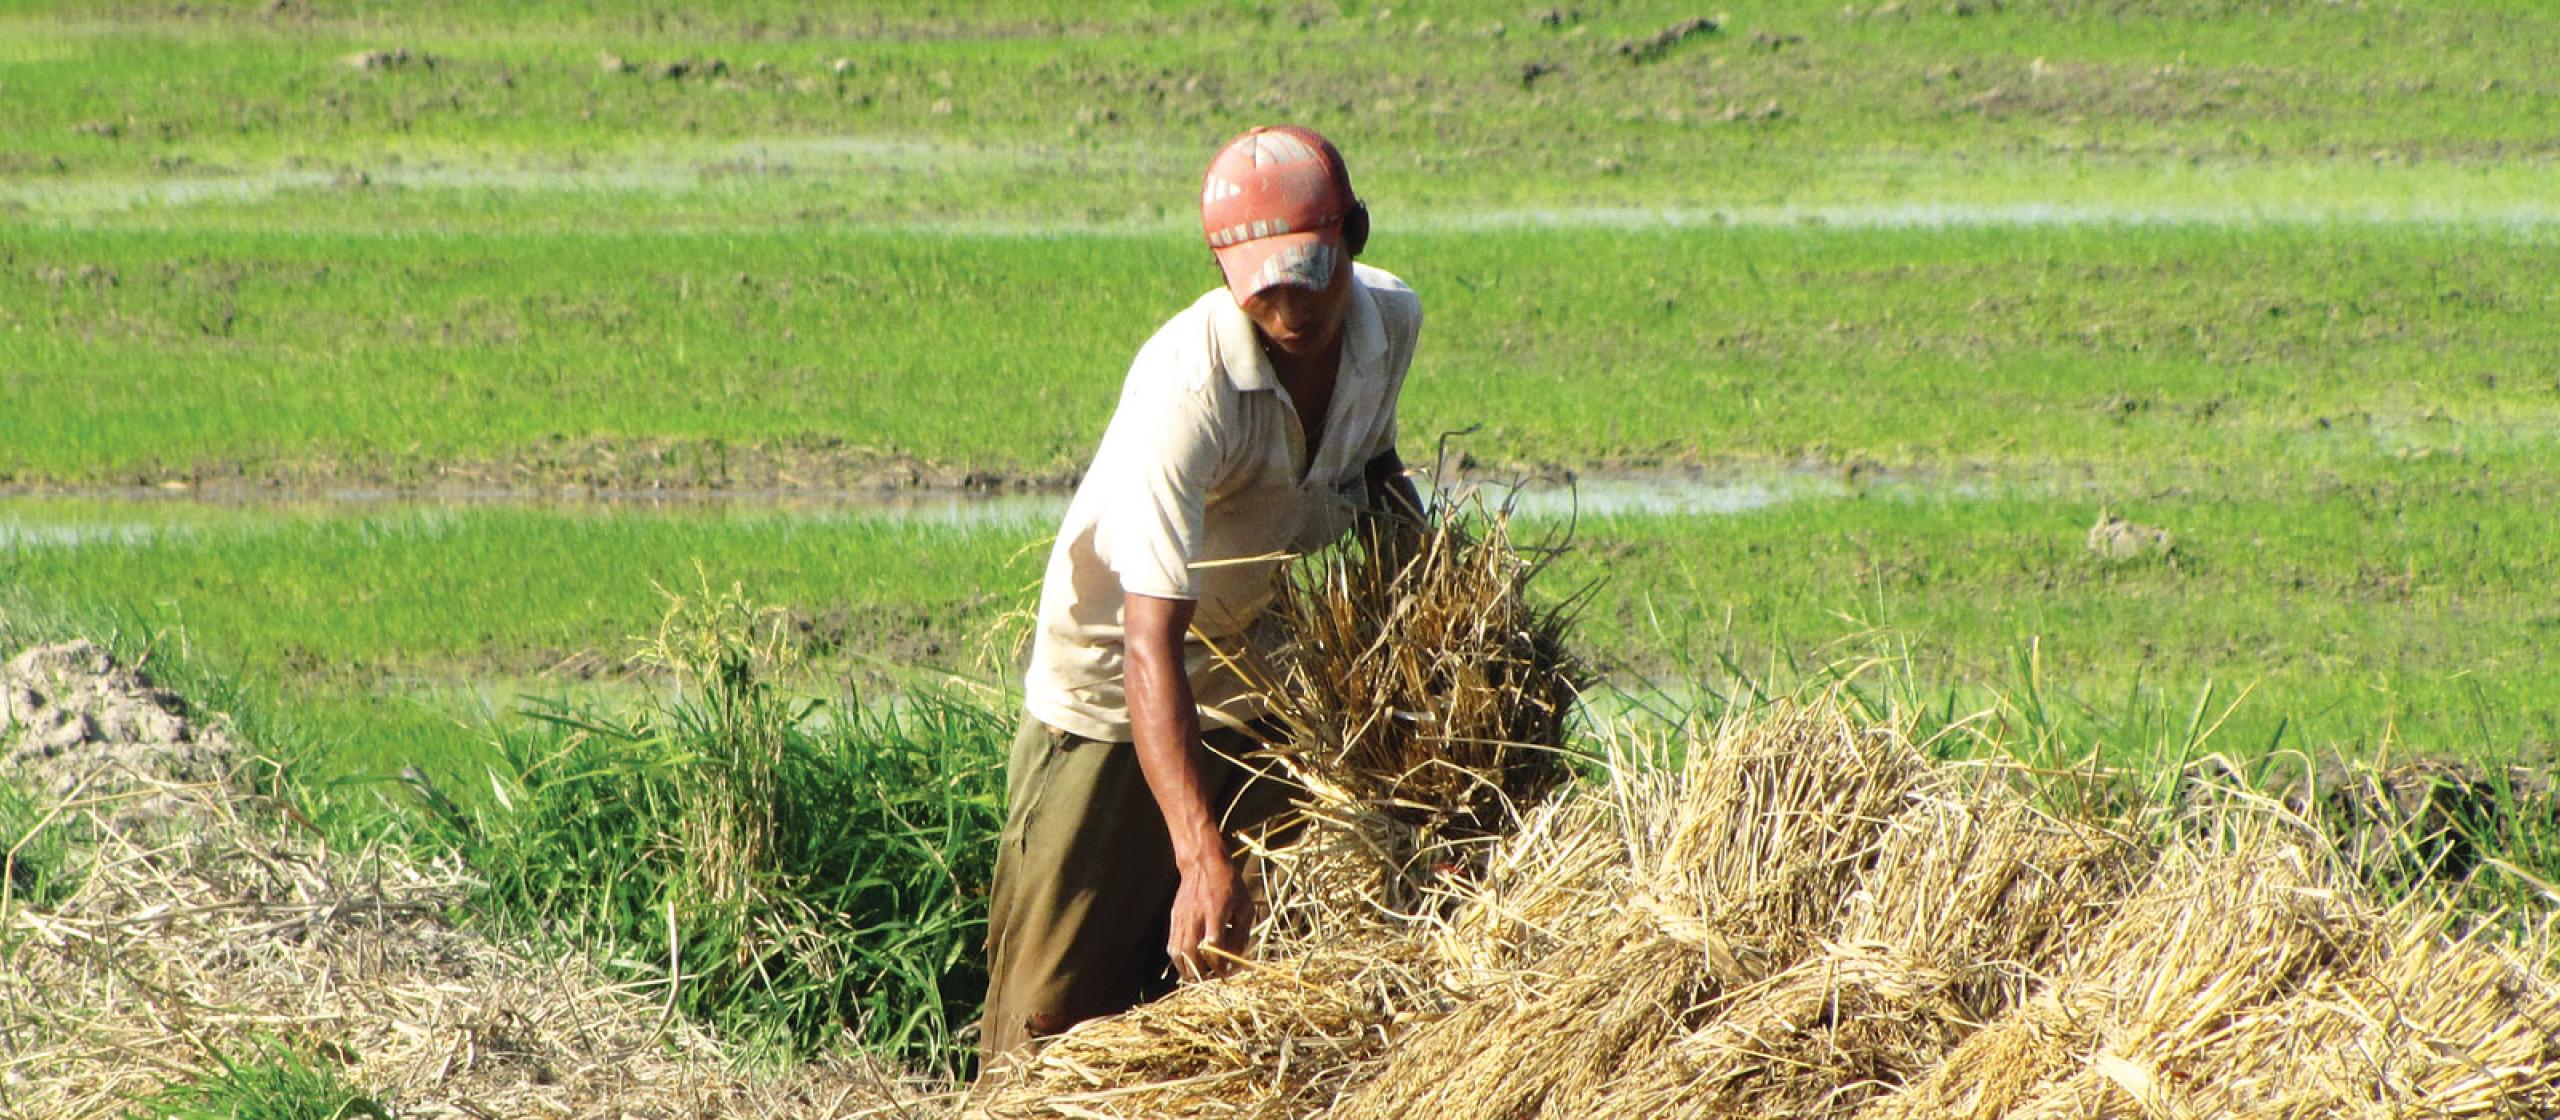 a man collecting straw in a field.